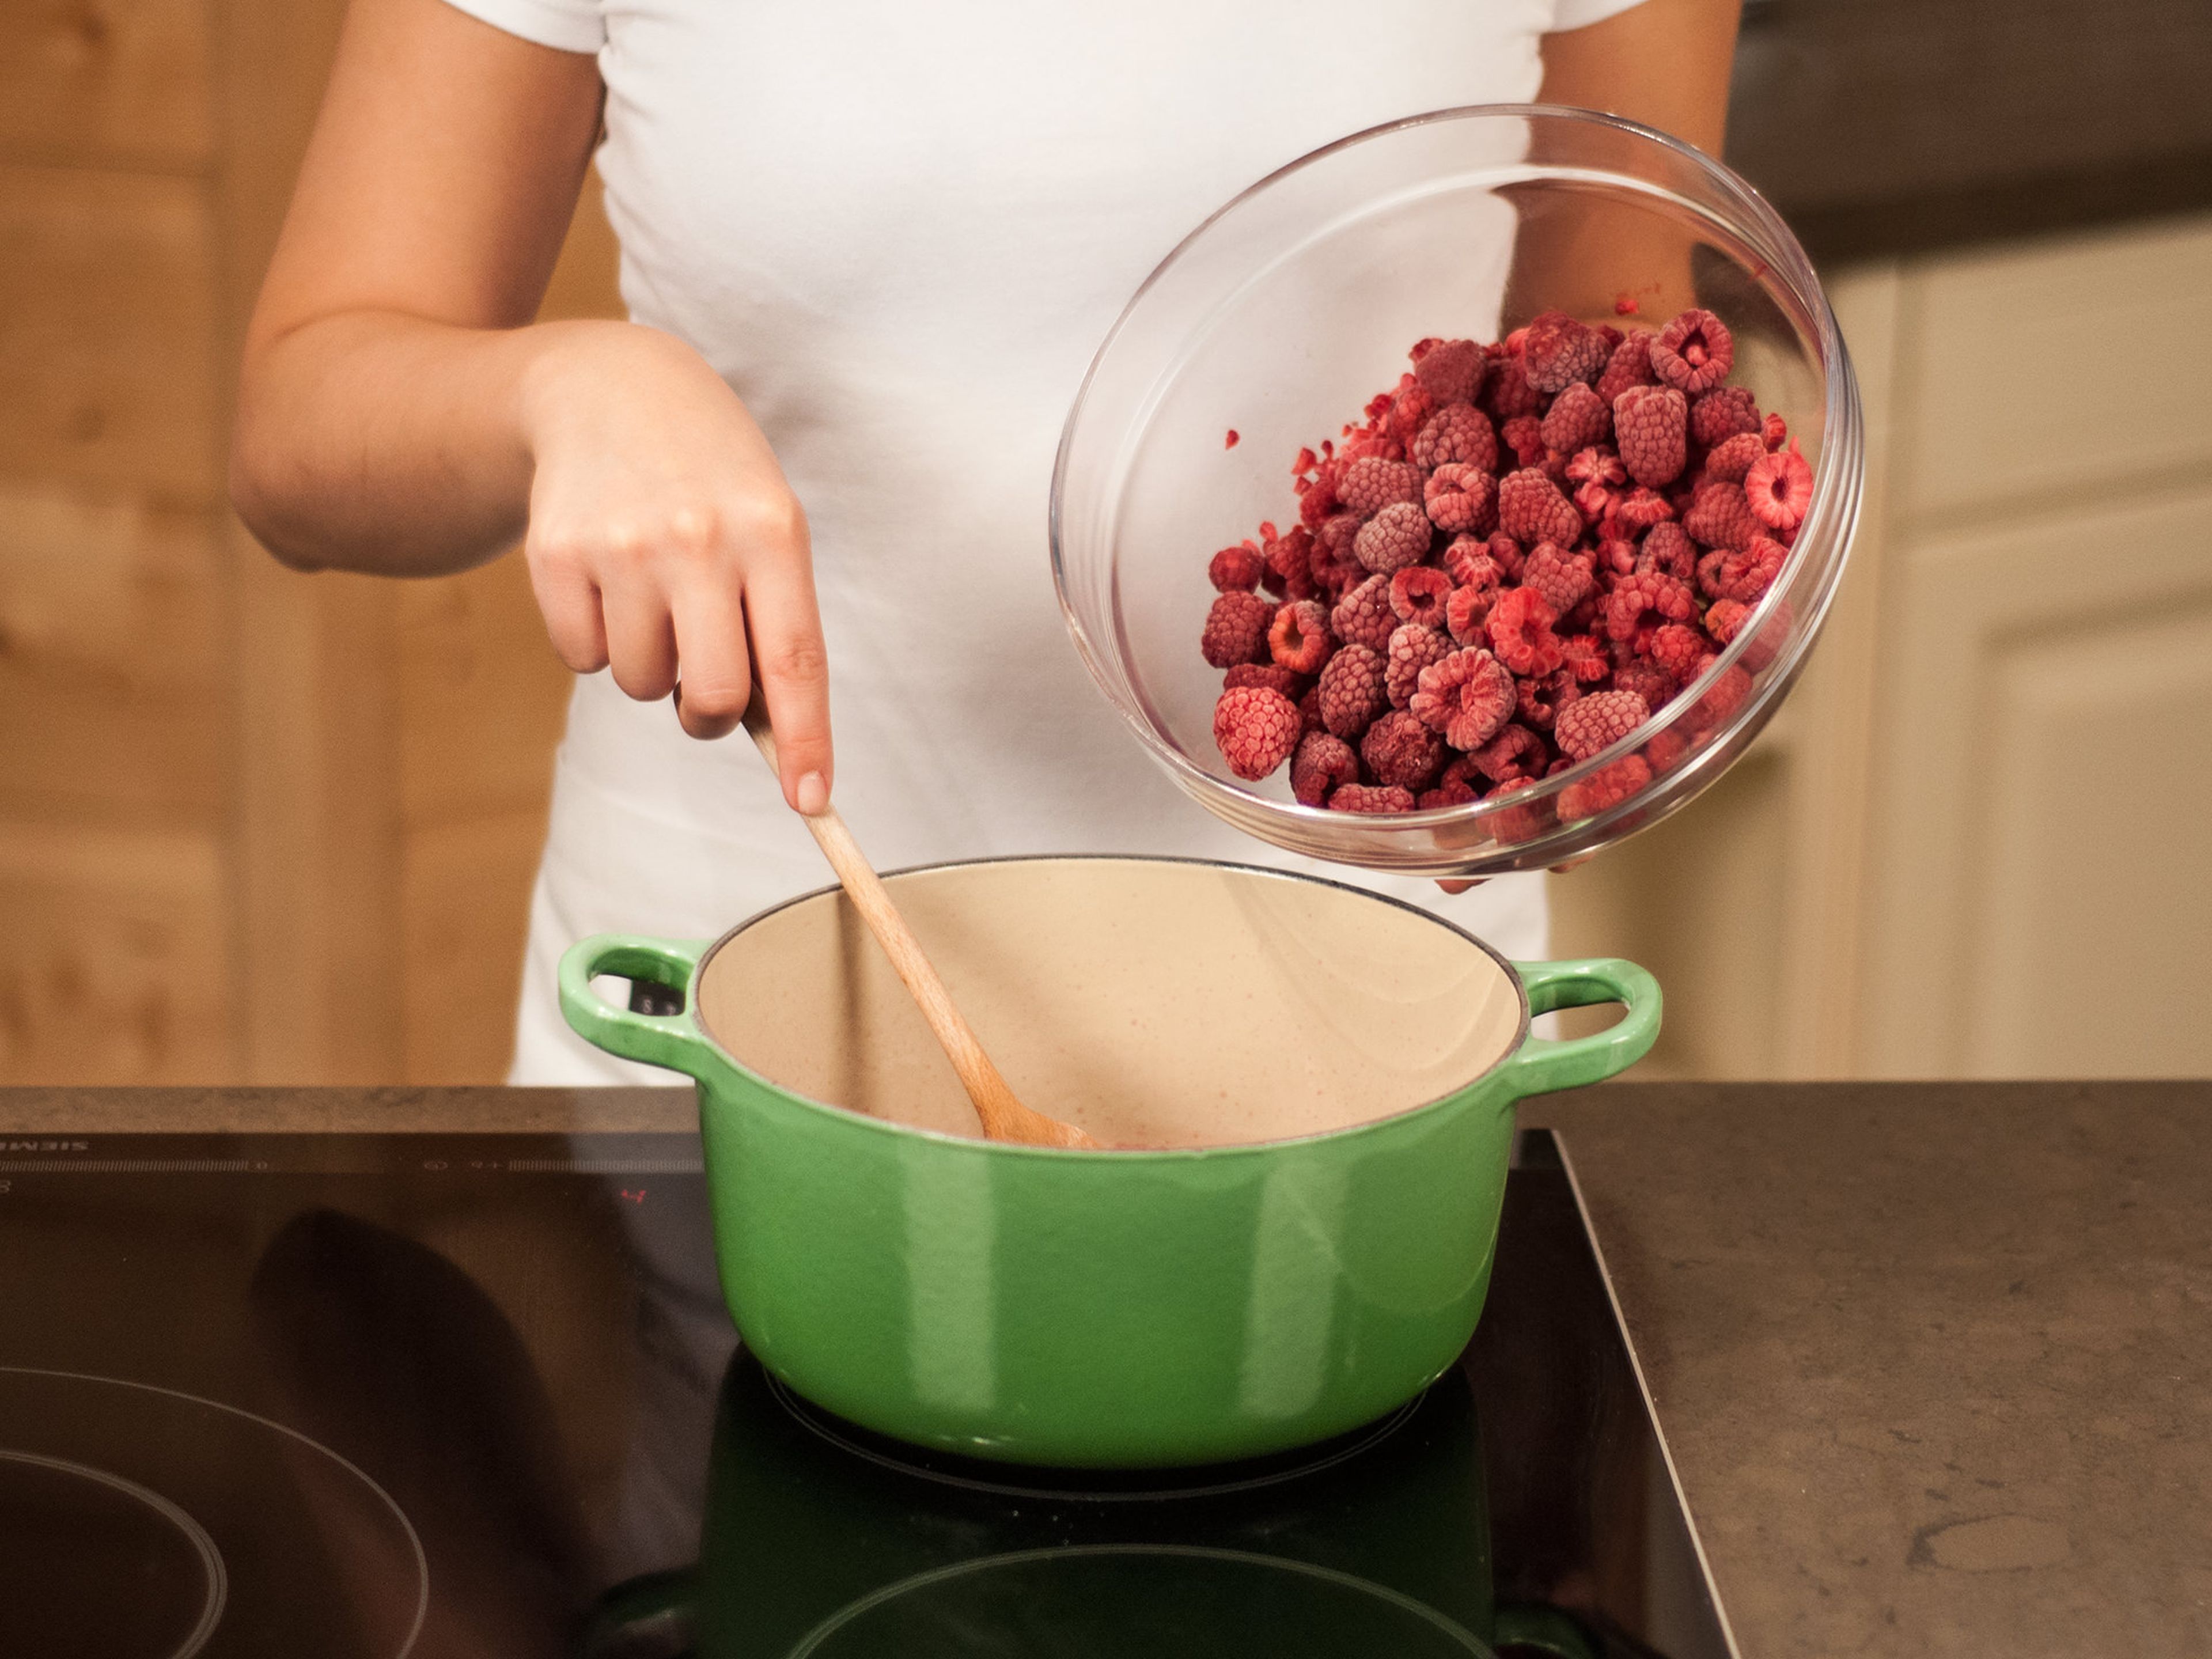 Then, add the raspberries and let them sit in the hot mixture for approx. 10 min. until they are fully warmed through. Do not let the mixture boil anymore since that will destroy the structure of the raspberries.